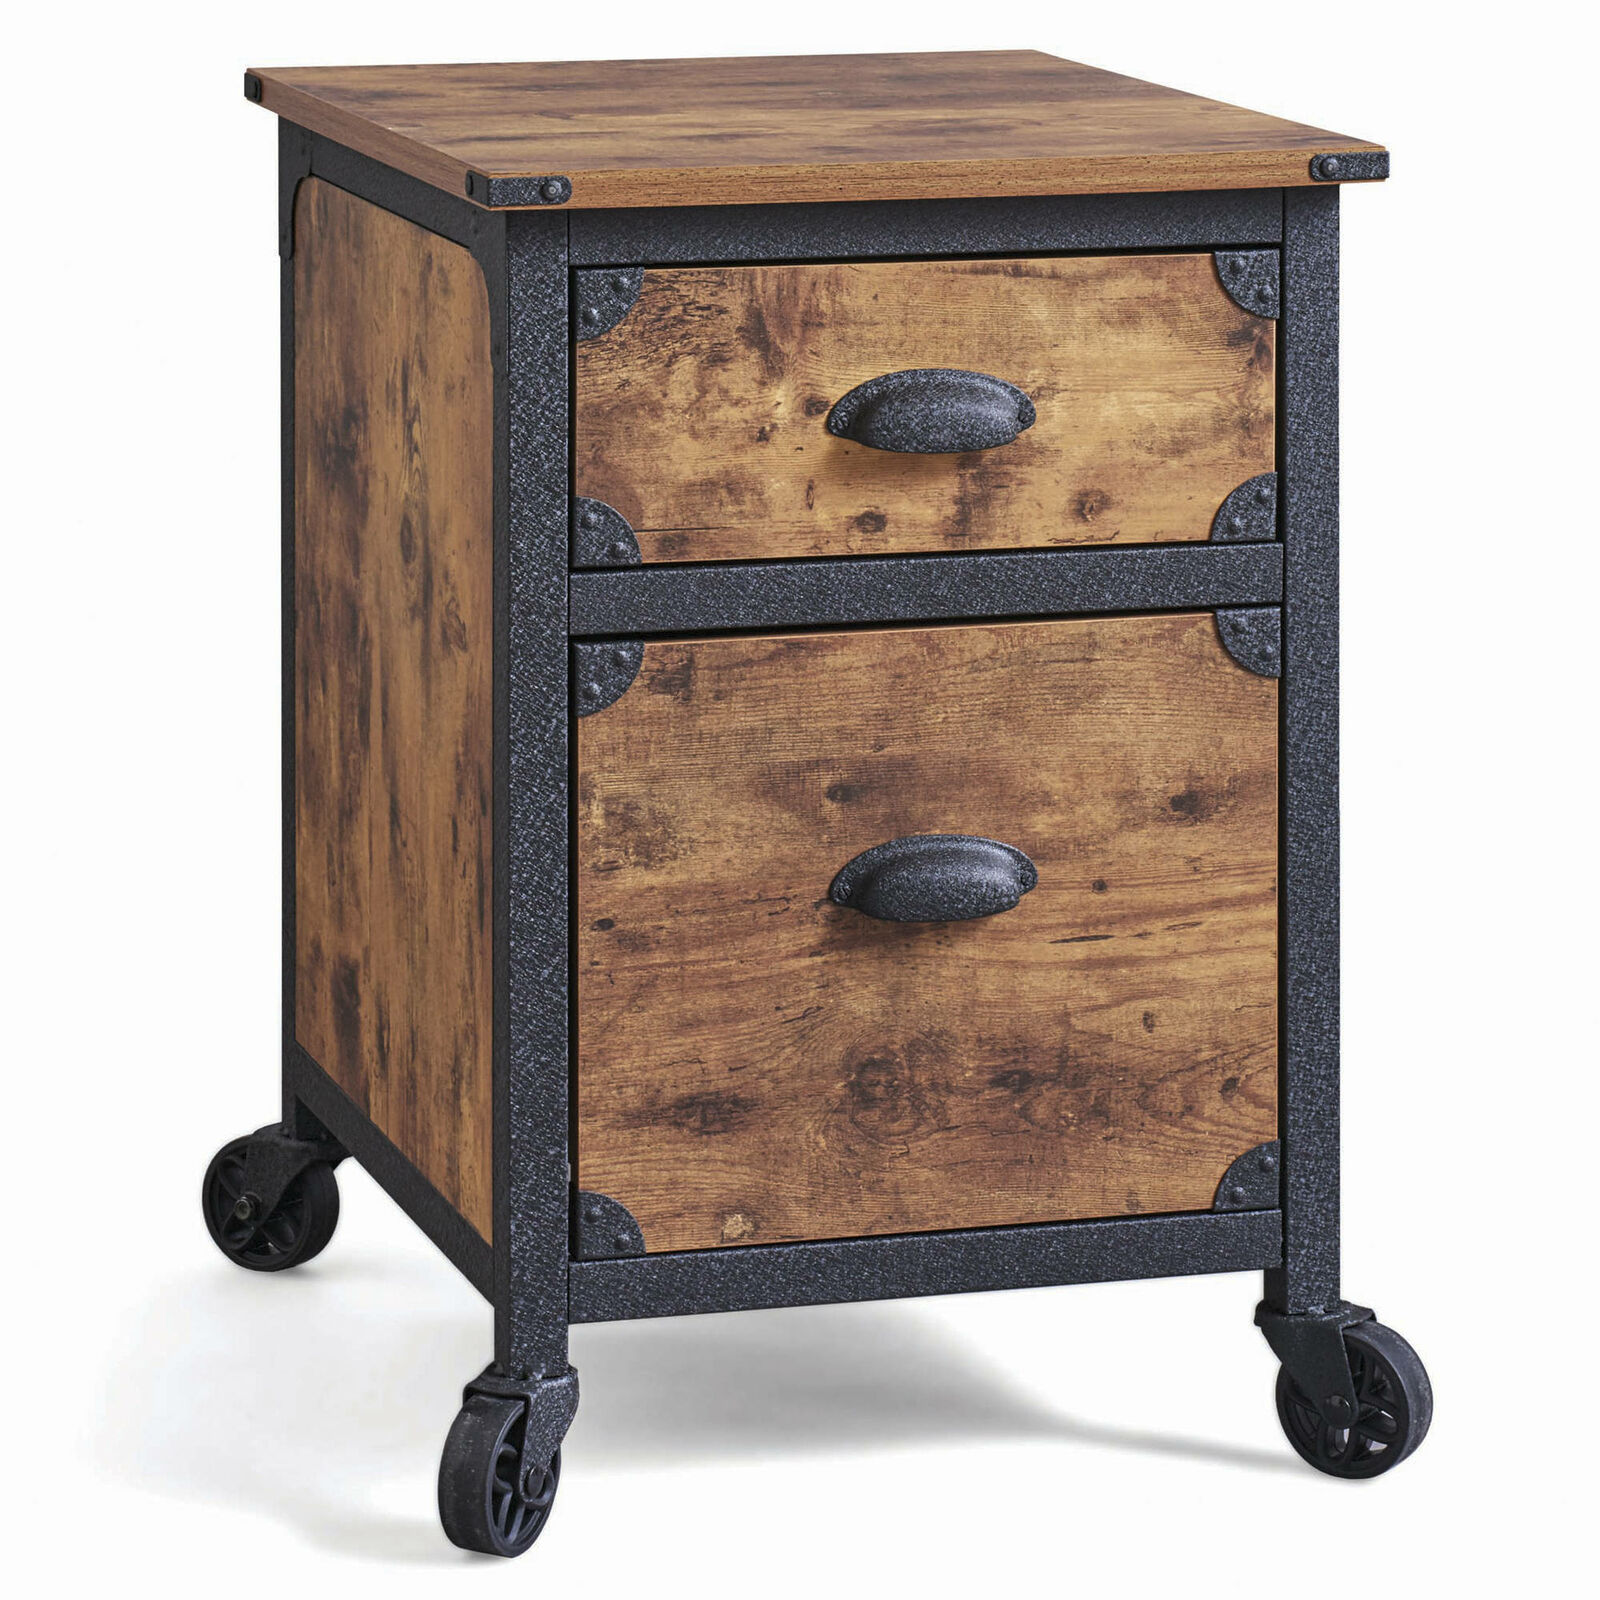 file cabinet drawer rustic country weathered pine finish bedroom end table with wood metal industrial home office furniture replace glass coffee tile italian ryobi discontinued